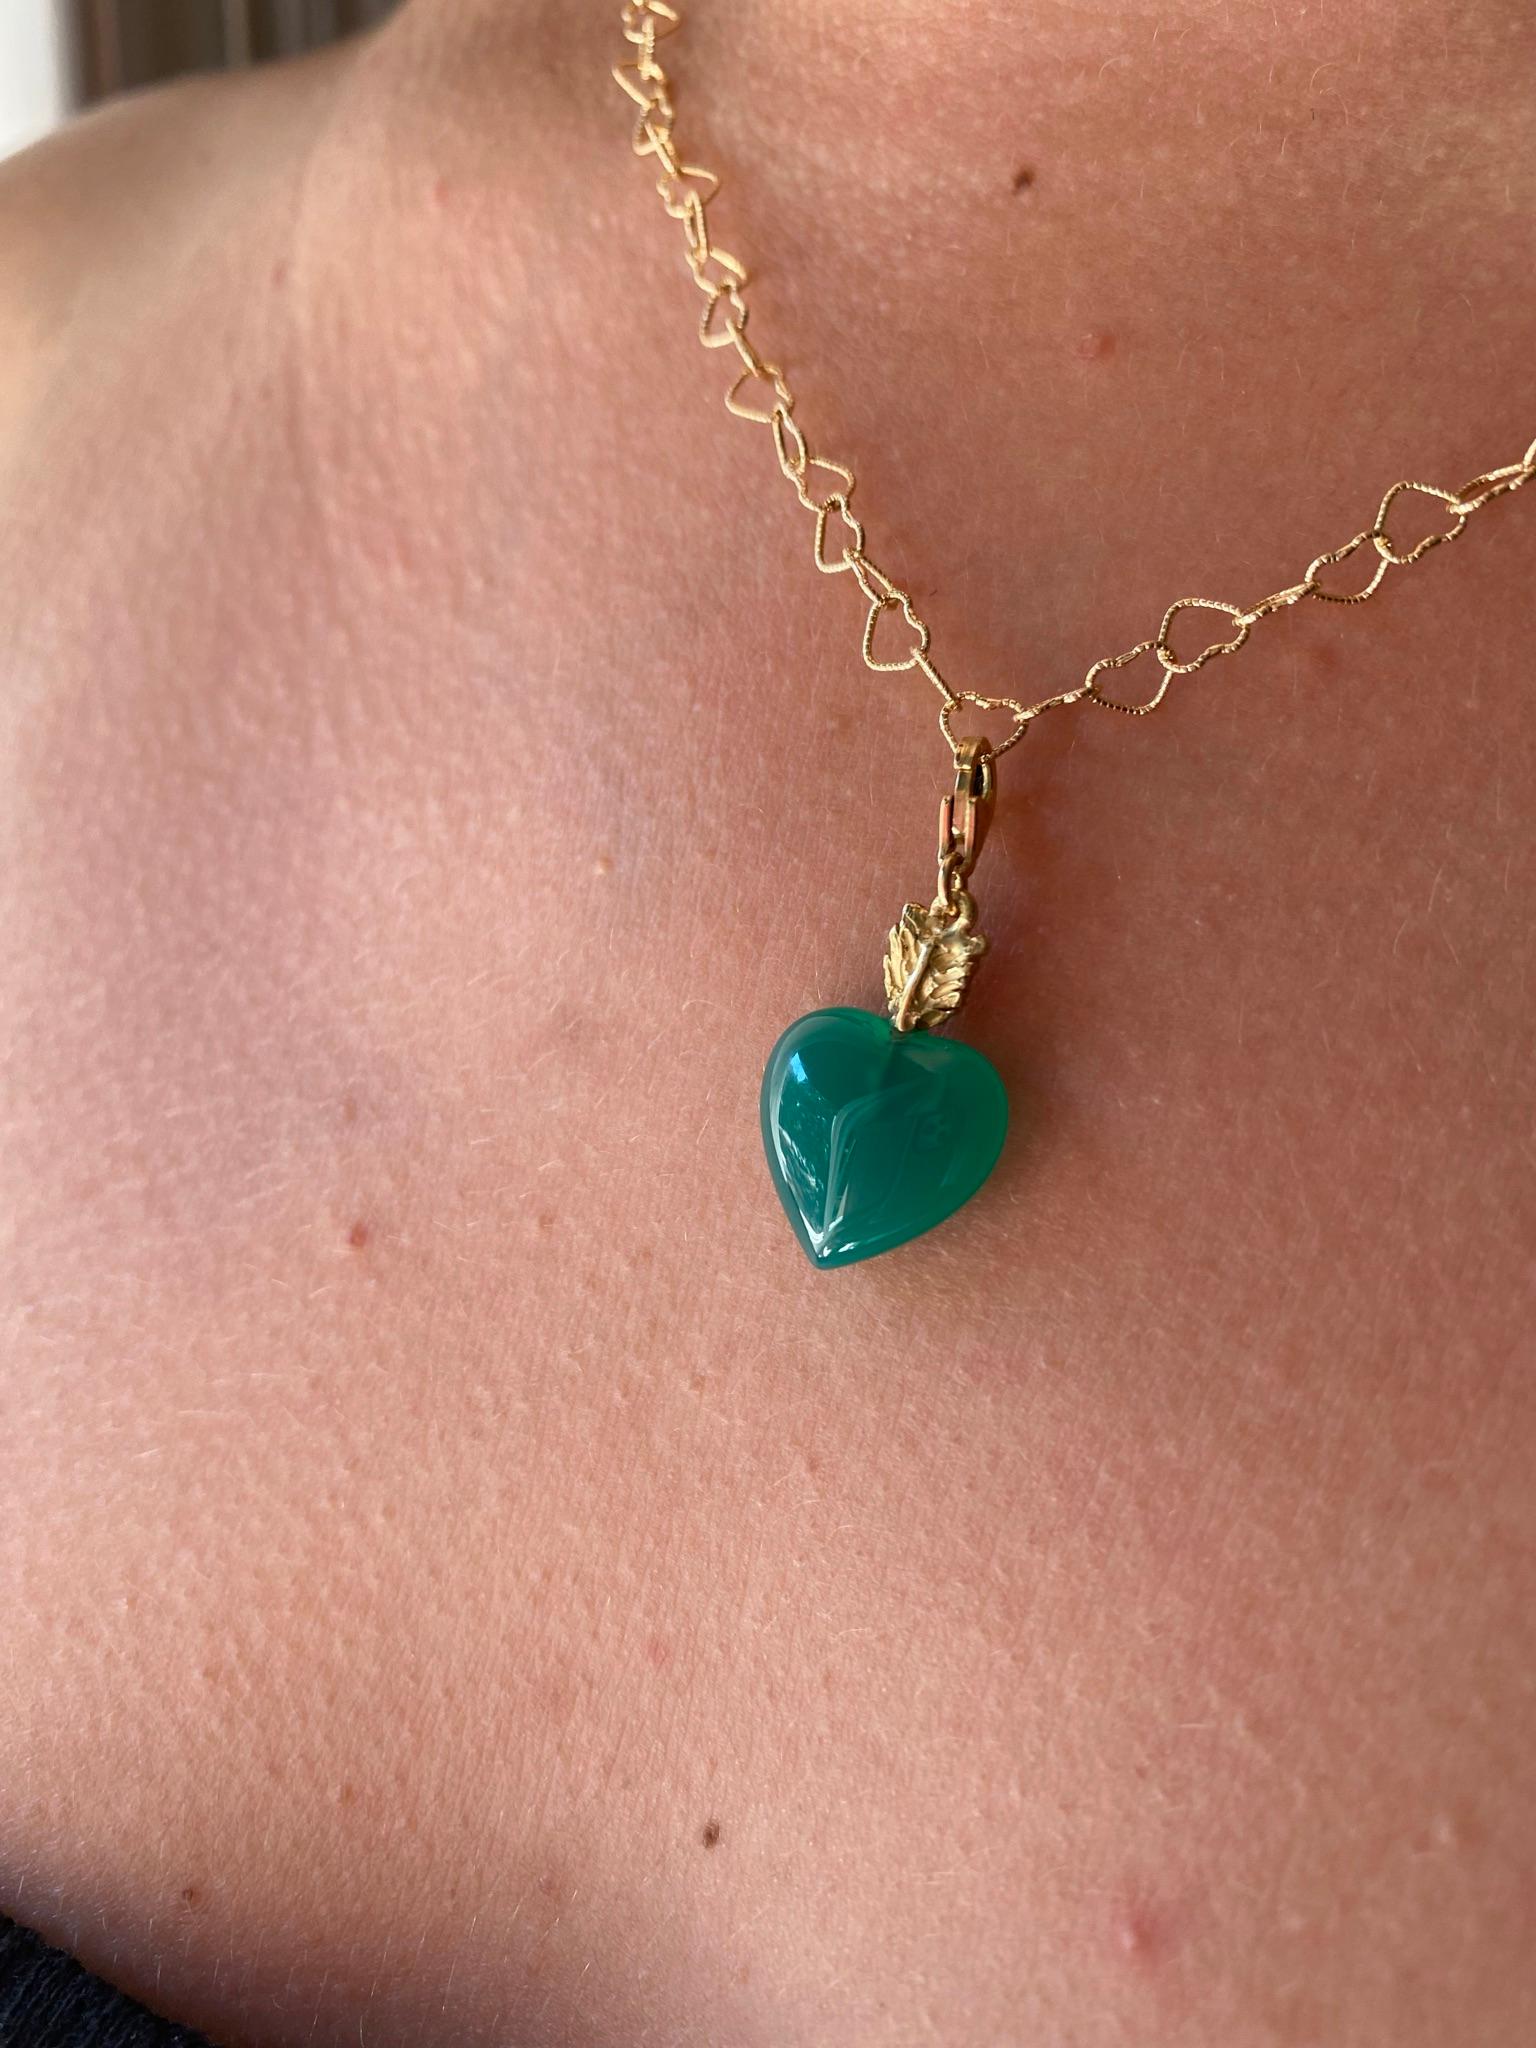 Charm 18 Karats Gold Green Agate Heart Shape Love Feather Handcrafted Pendant
A nice pendant handcrafted in 18 karats gold adorned with beautiful deep green heart shaped agate.
For sale as a single pendent this piece is entirely manufactured, in an